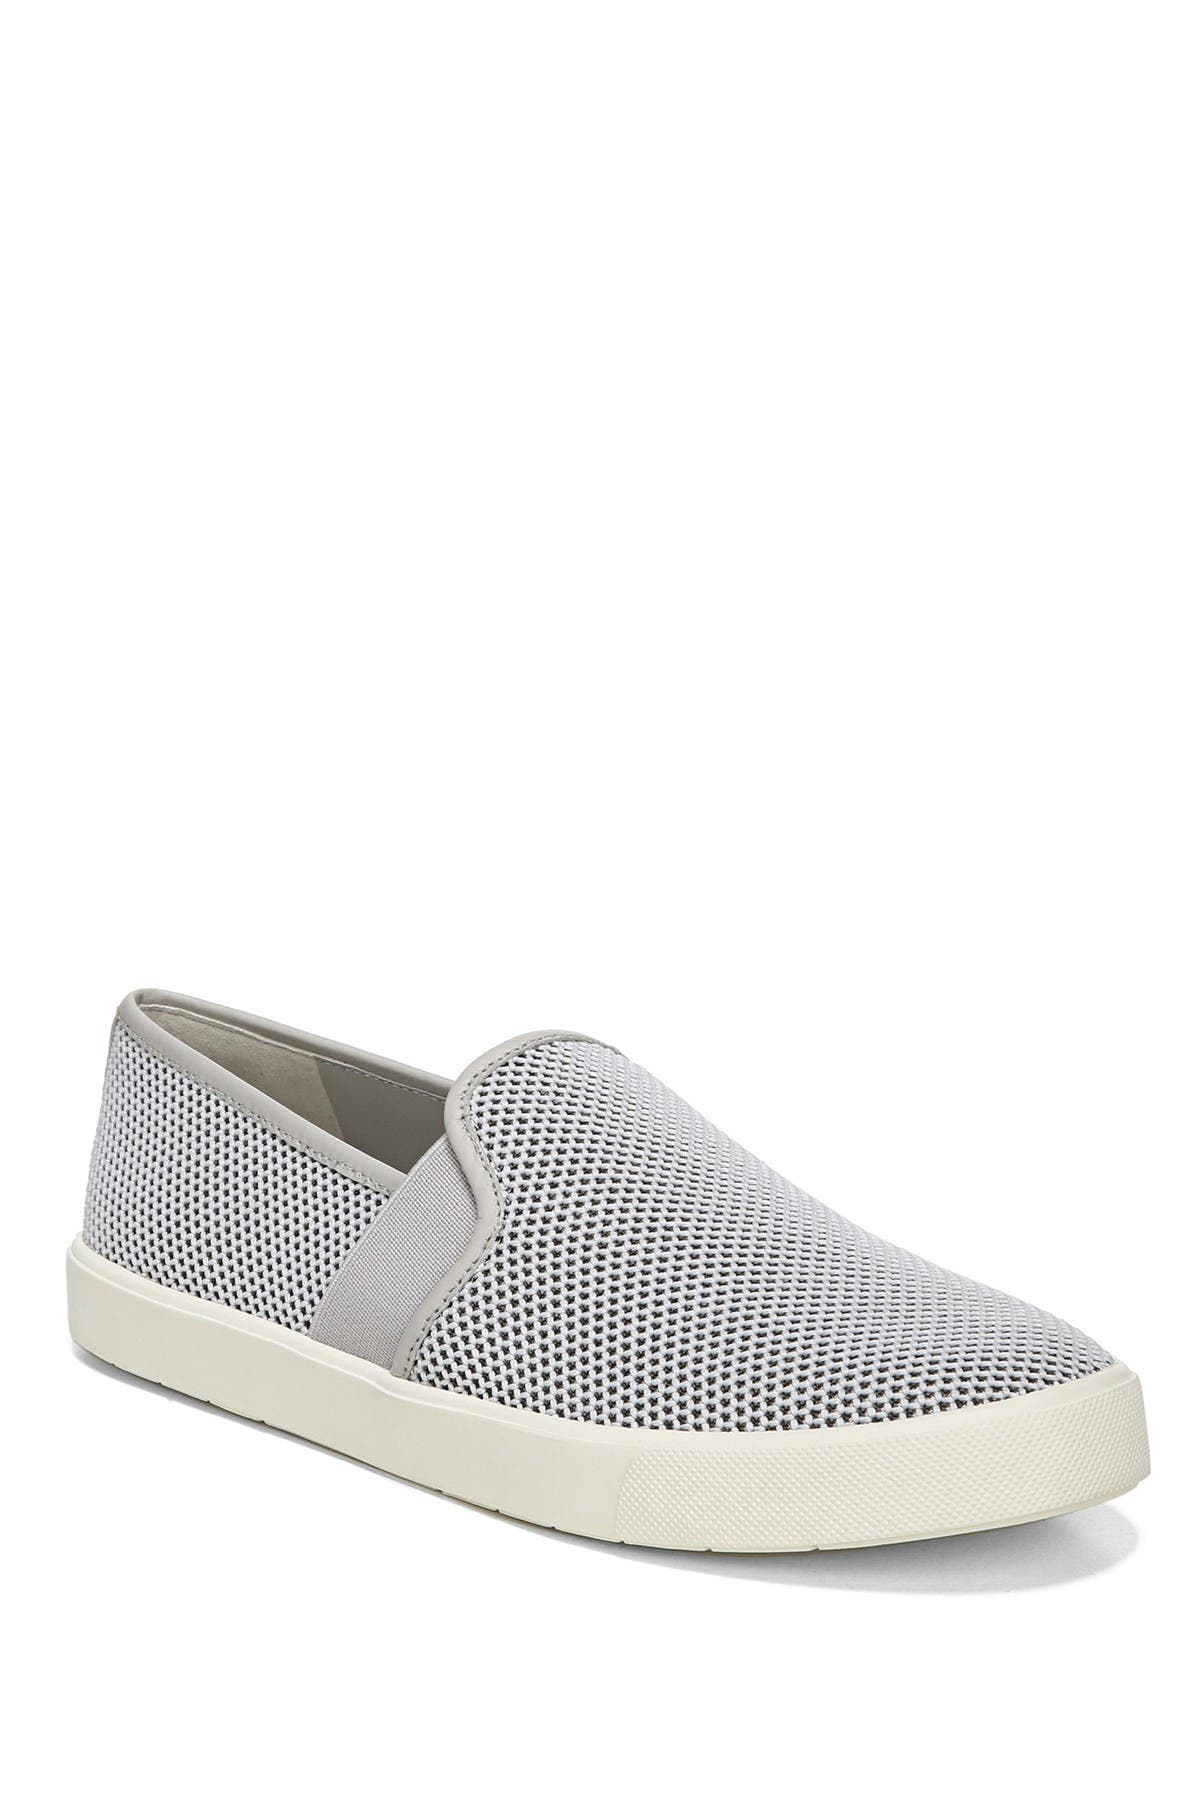 vince perforated leather blair sneaker